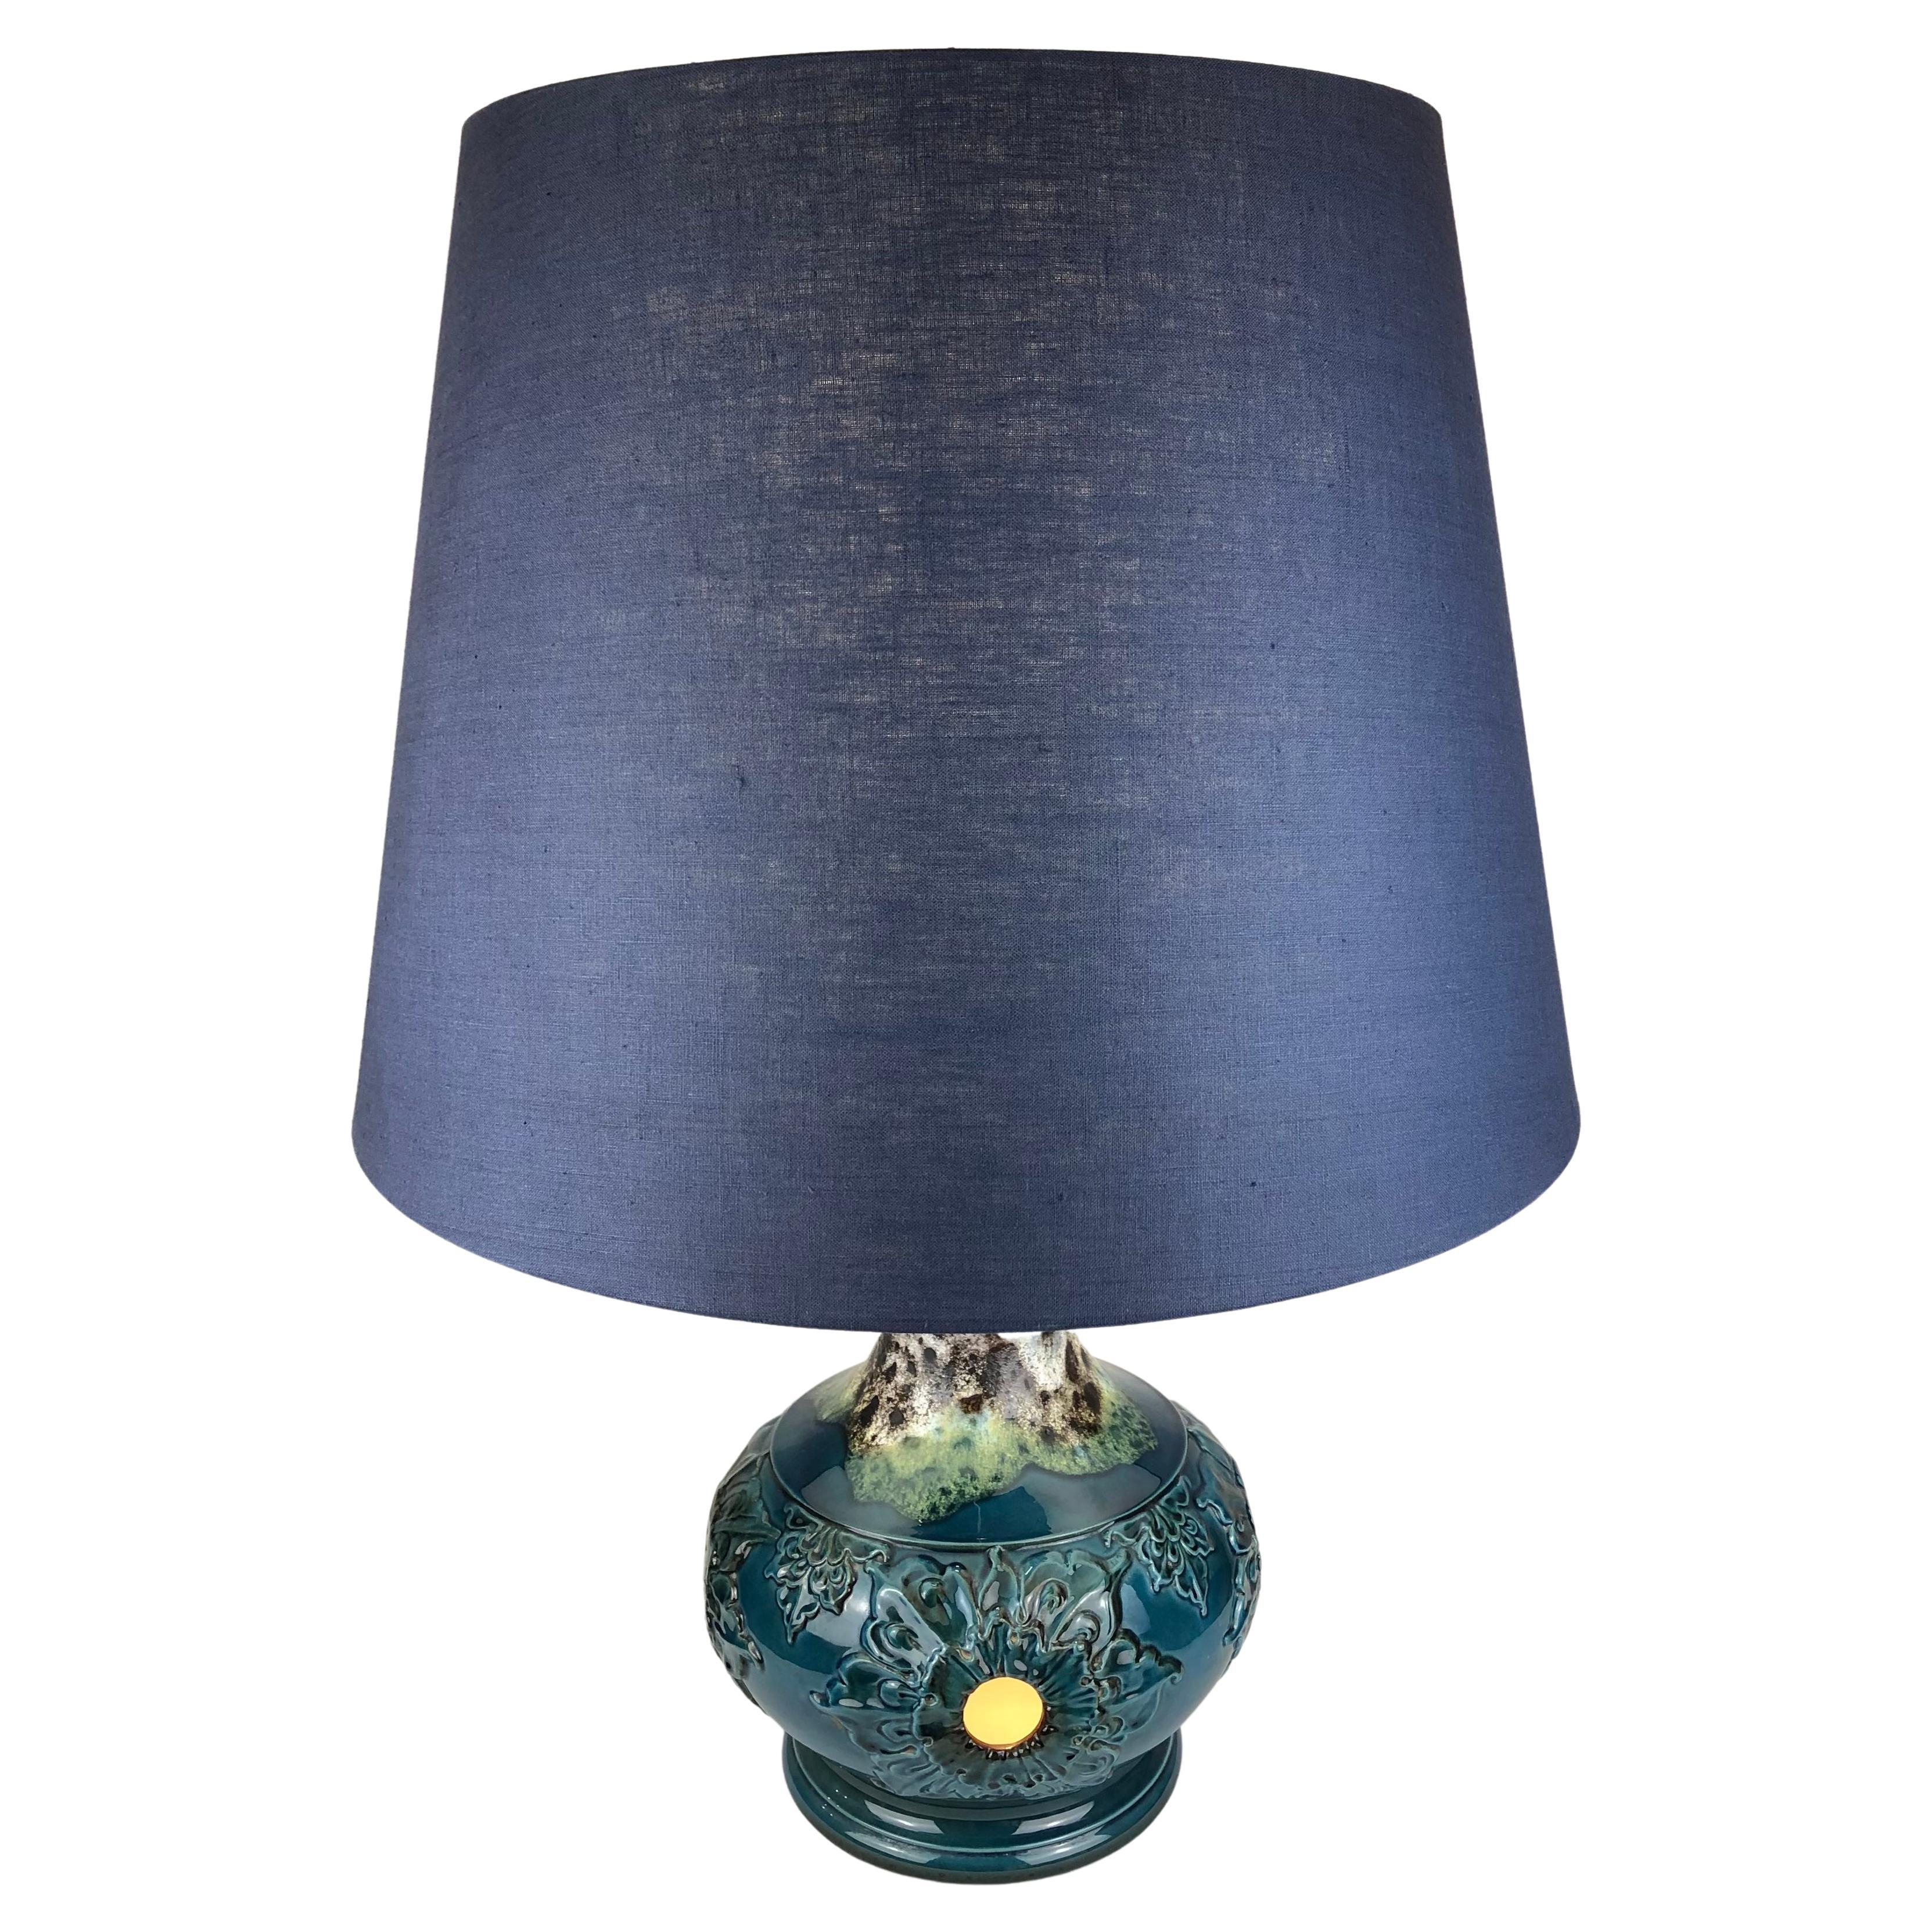 Large French Mid- 20th Century Blue and Beige Glazed Ceramic Table Lamp For Sale